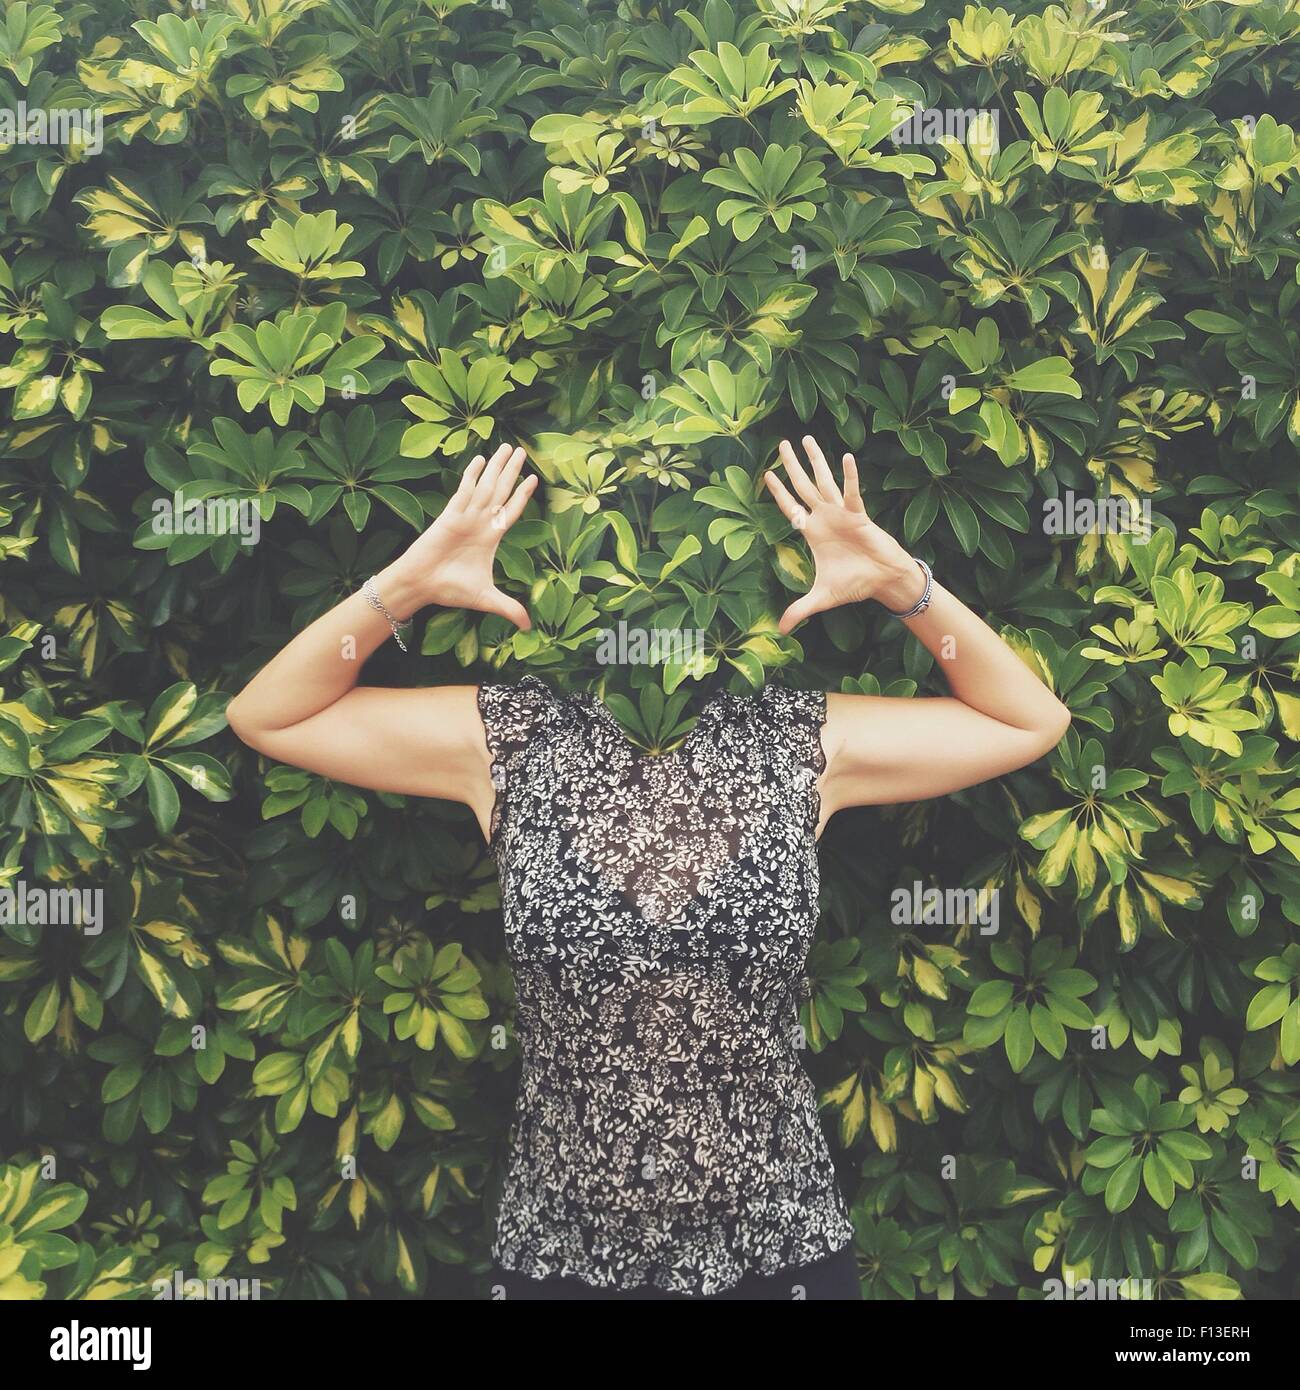 Women with face hidden behind leaves standing with raised arms Stock Photo